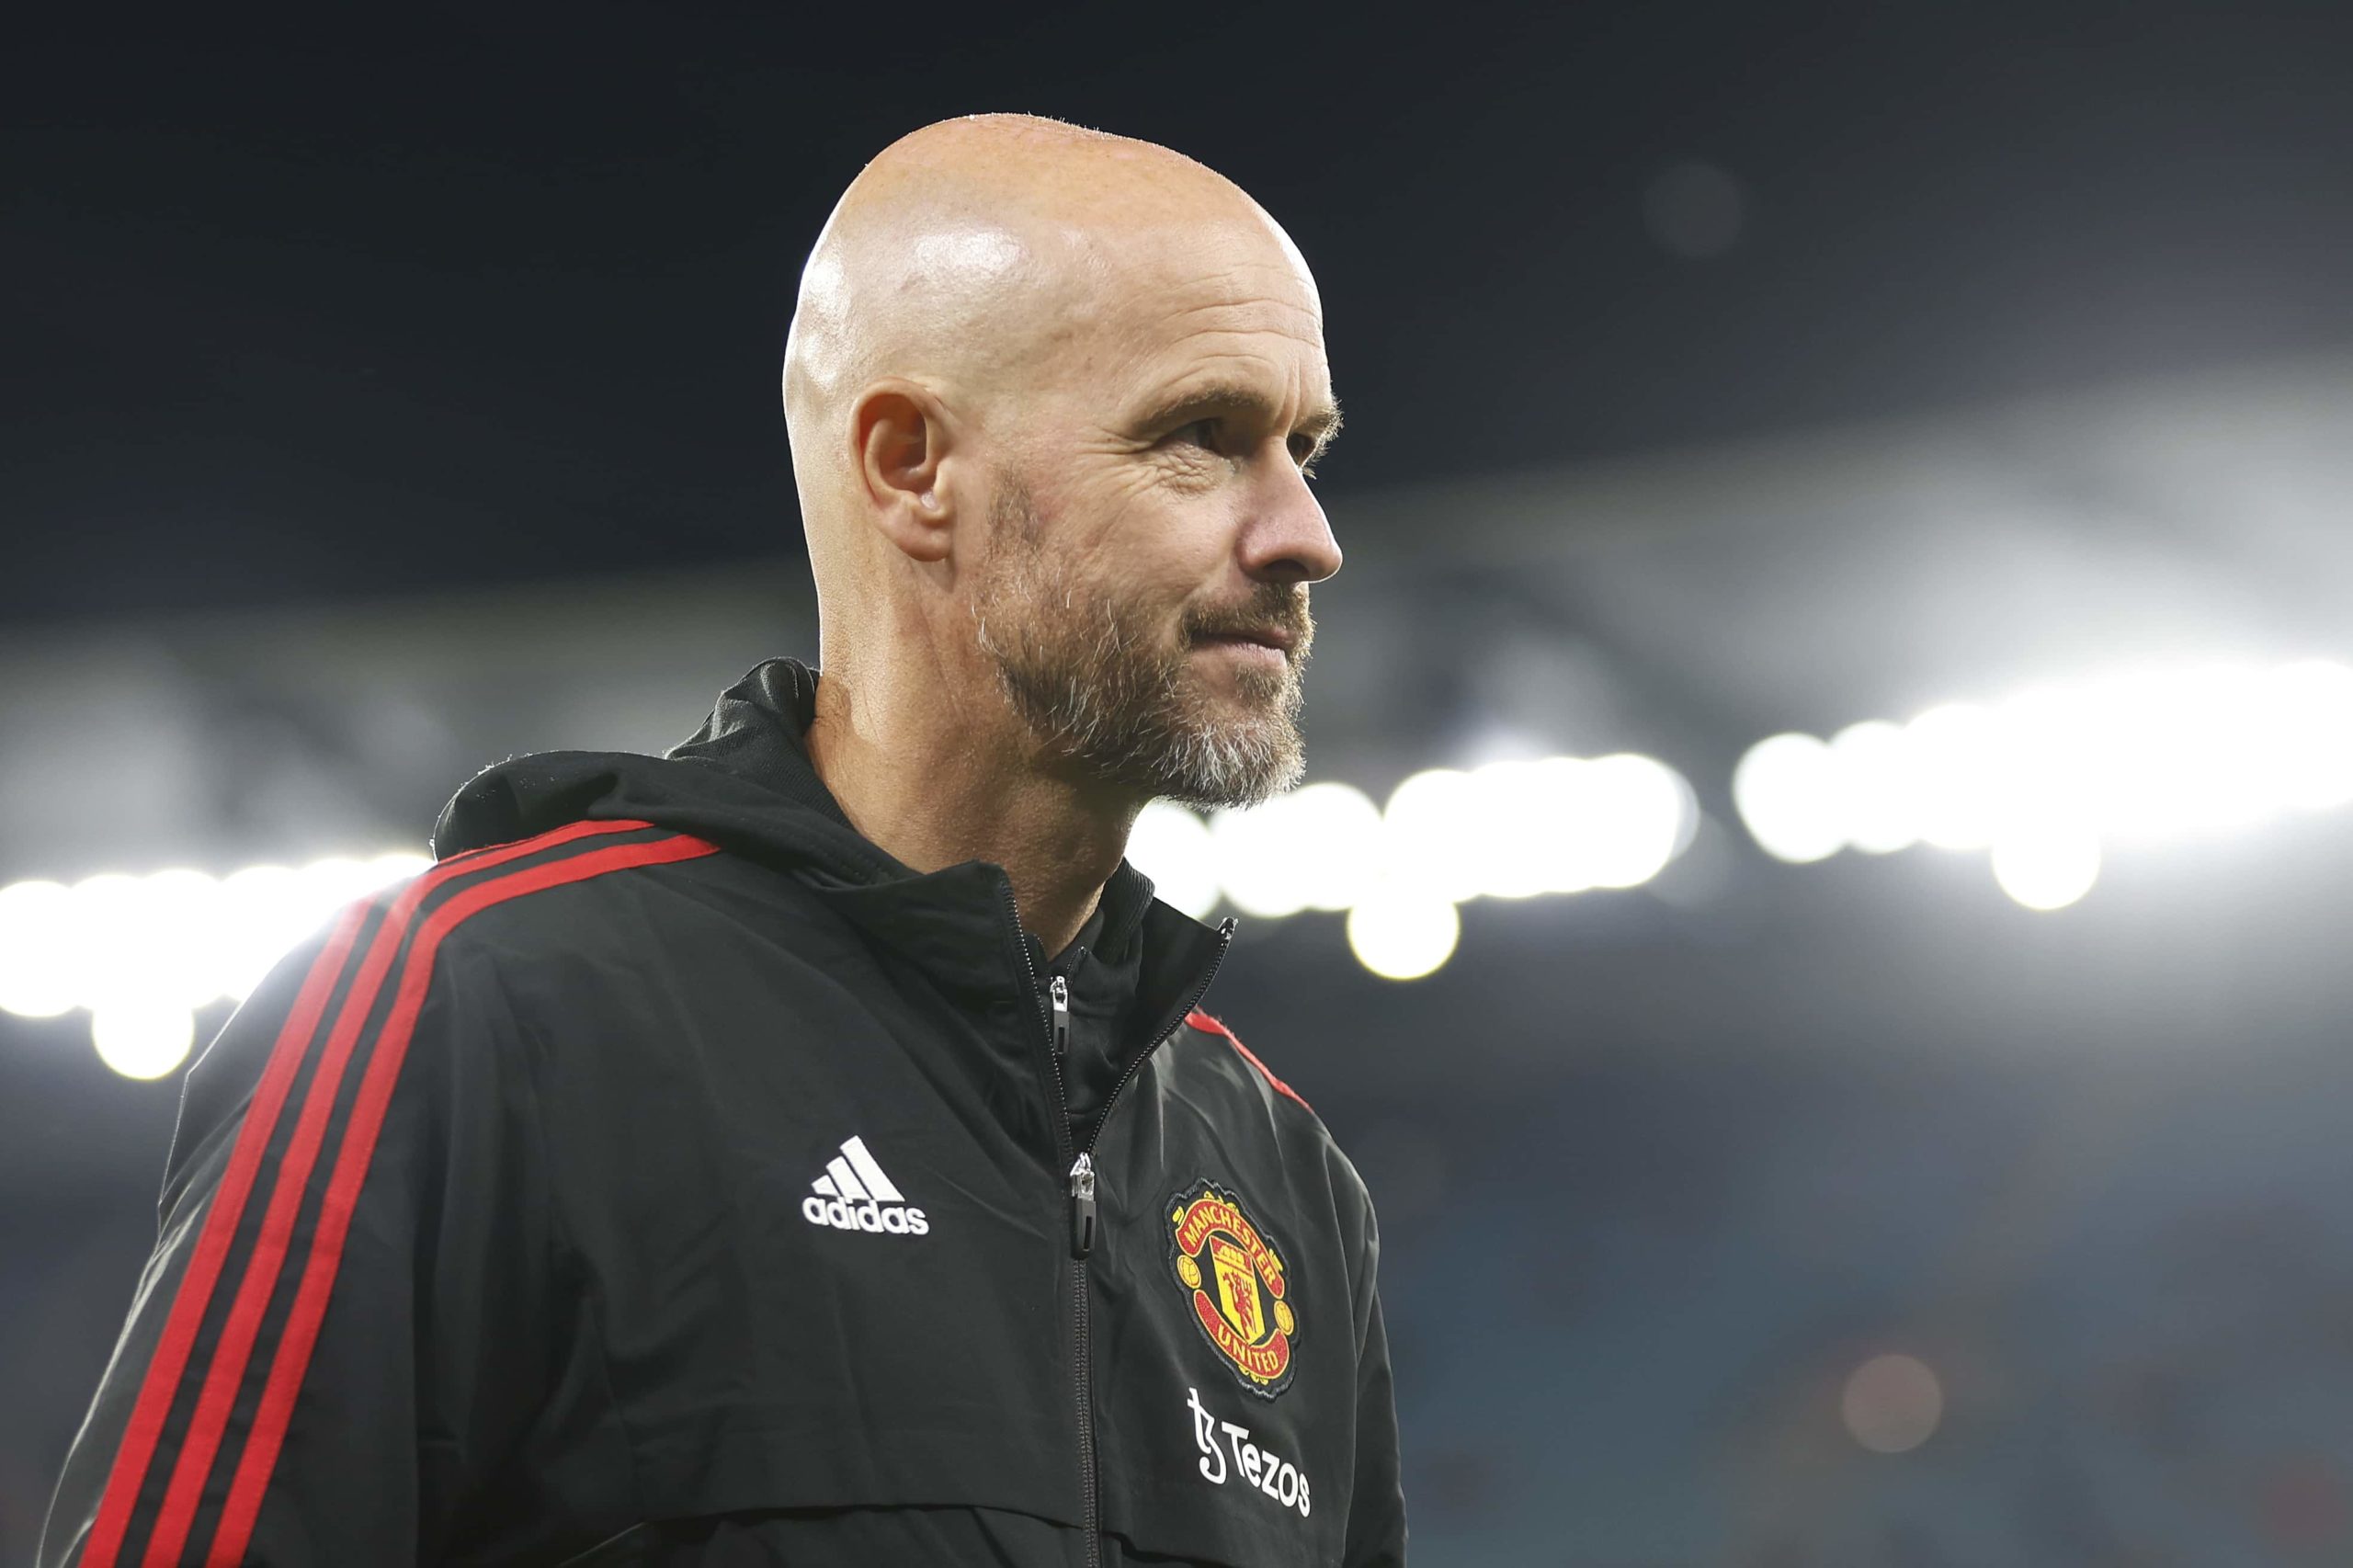 erik ten hag man united | FA charges Arsenal analyst for improper conduct | The Paradise